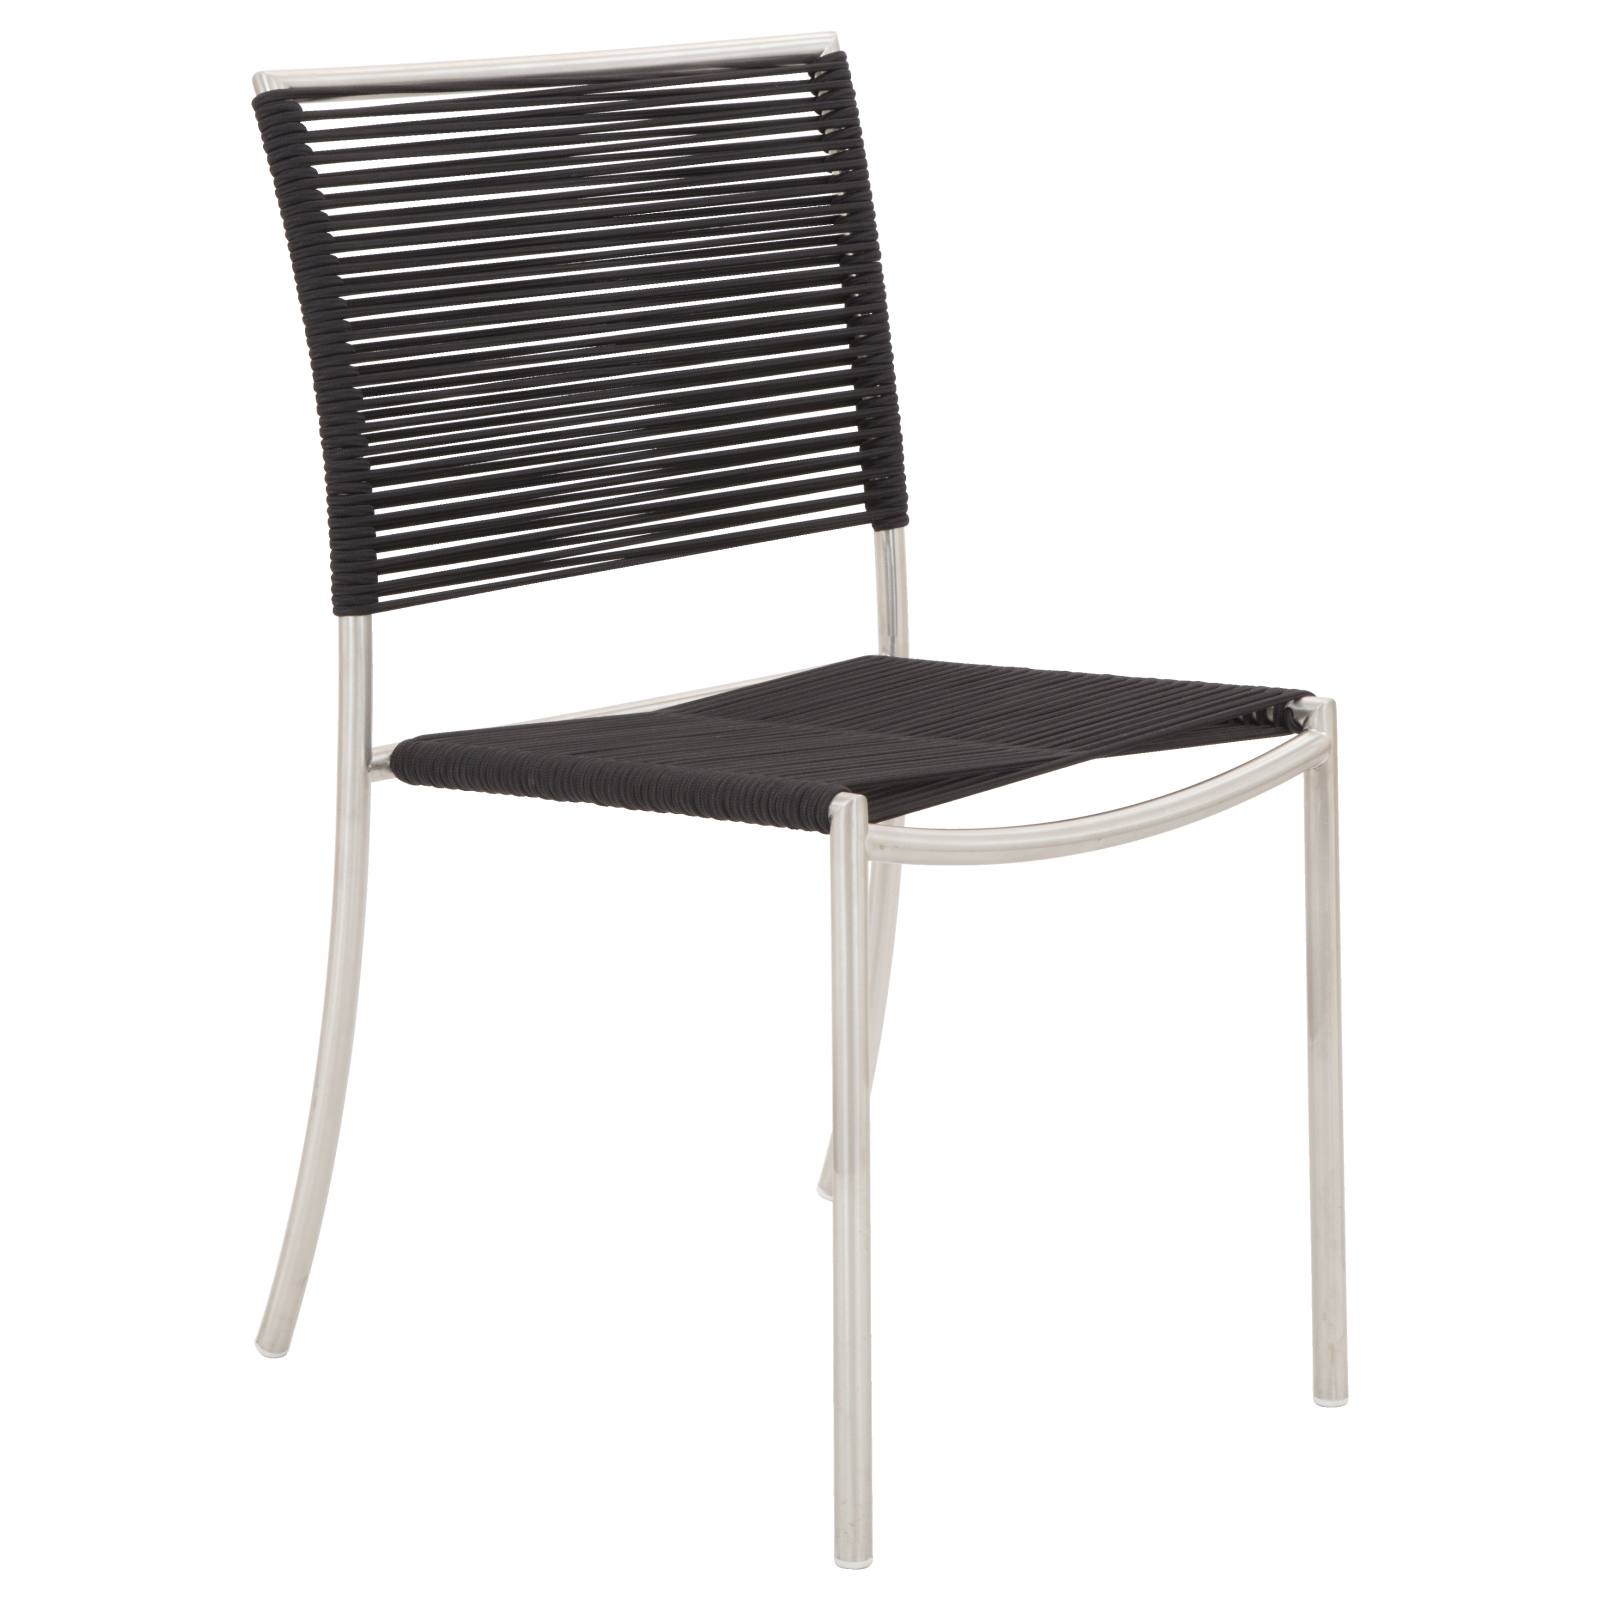 Albay Armless Dining Chair, Stainless Steel/Cord